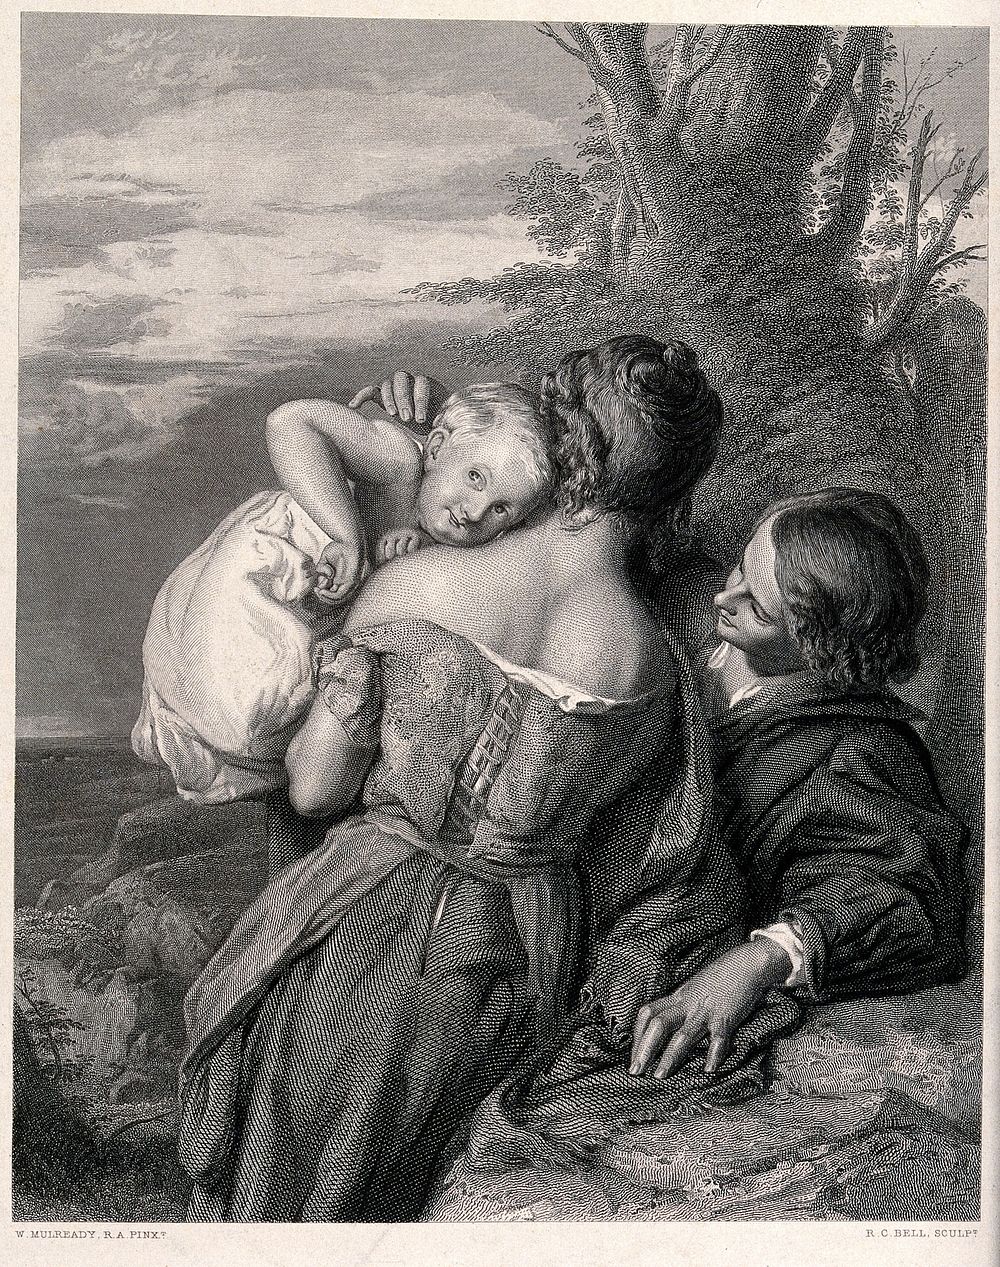 A brother and sister rest in a rocky landscape and play with a baby. Engraving by R.C. Bell after W. Mulready. R.A.